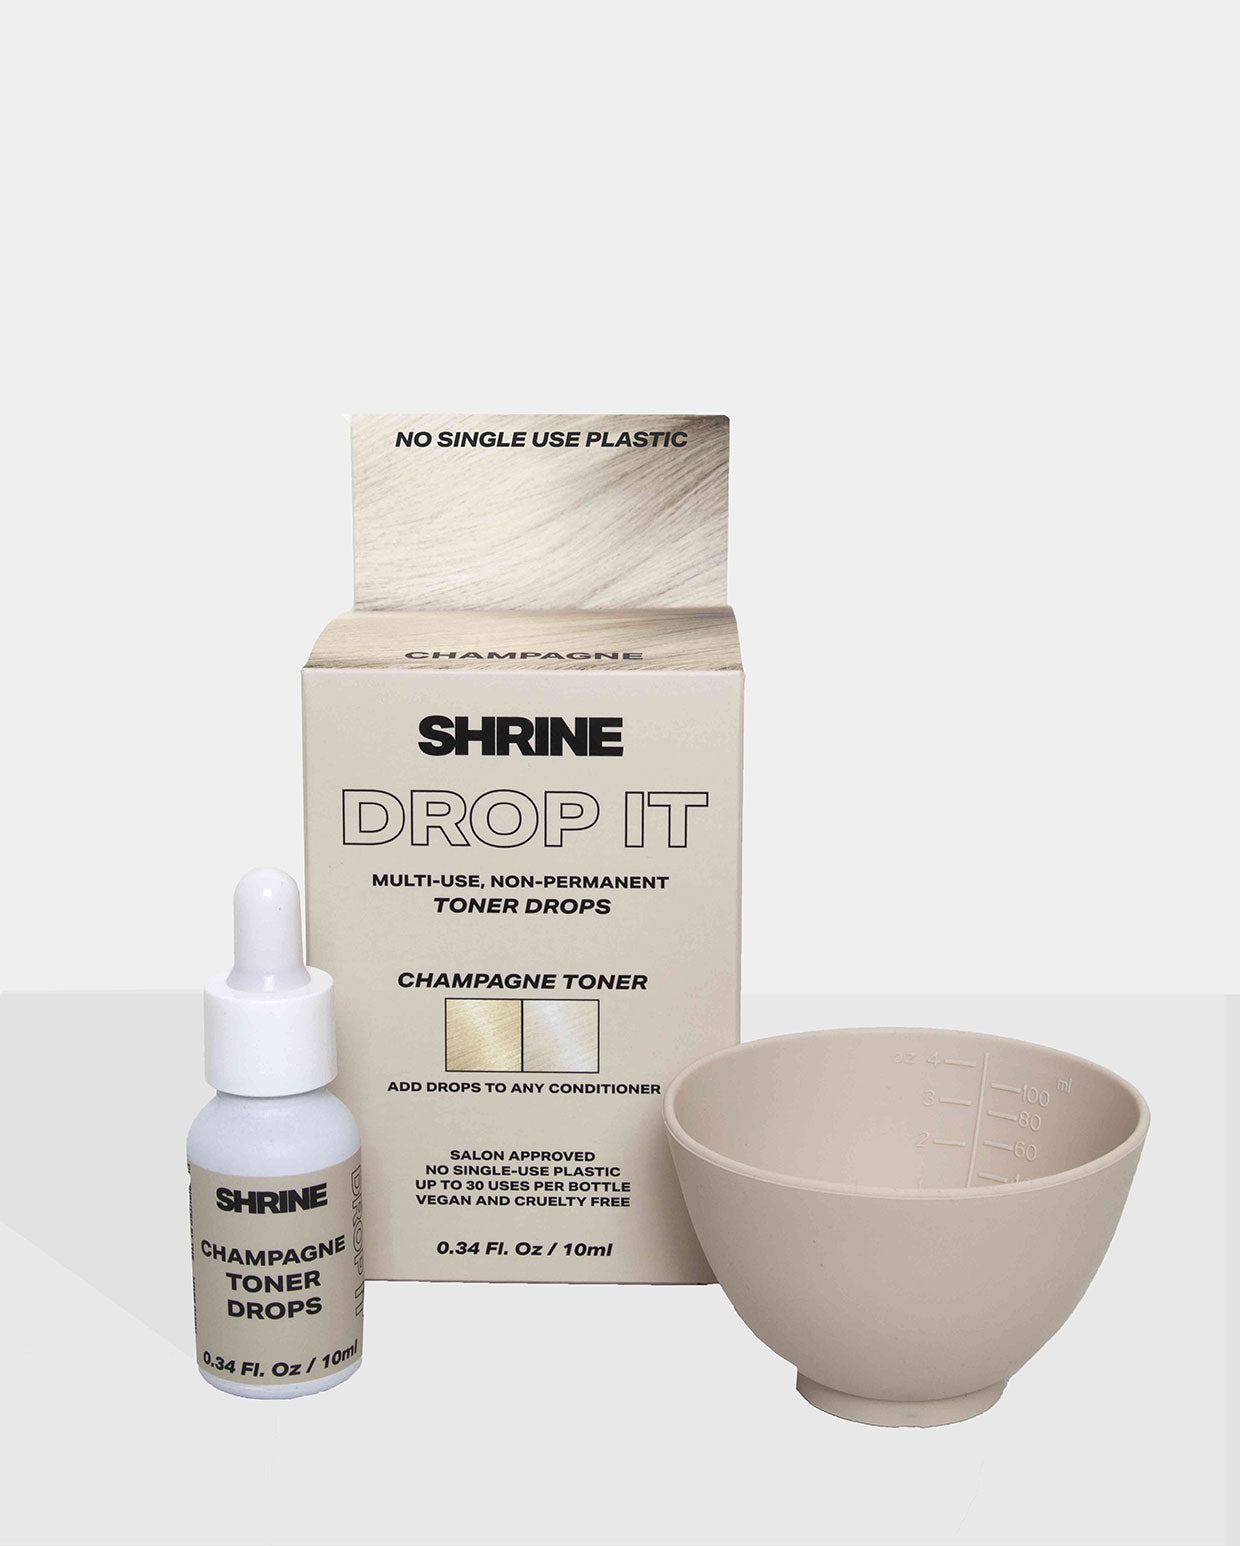 SHRINE DROP IT CHAMPAGNE TONER KIT INCLUDING PRODUCT AND MIXING BOWL 